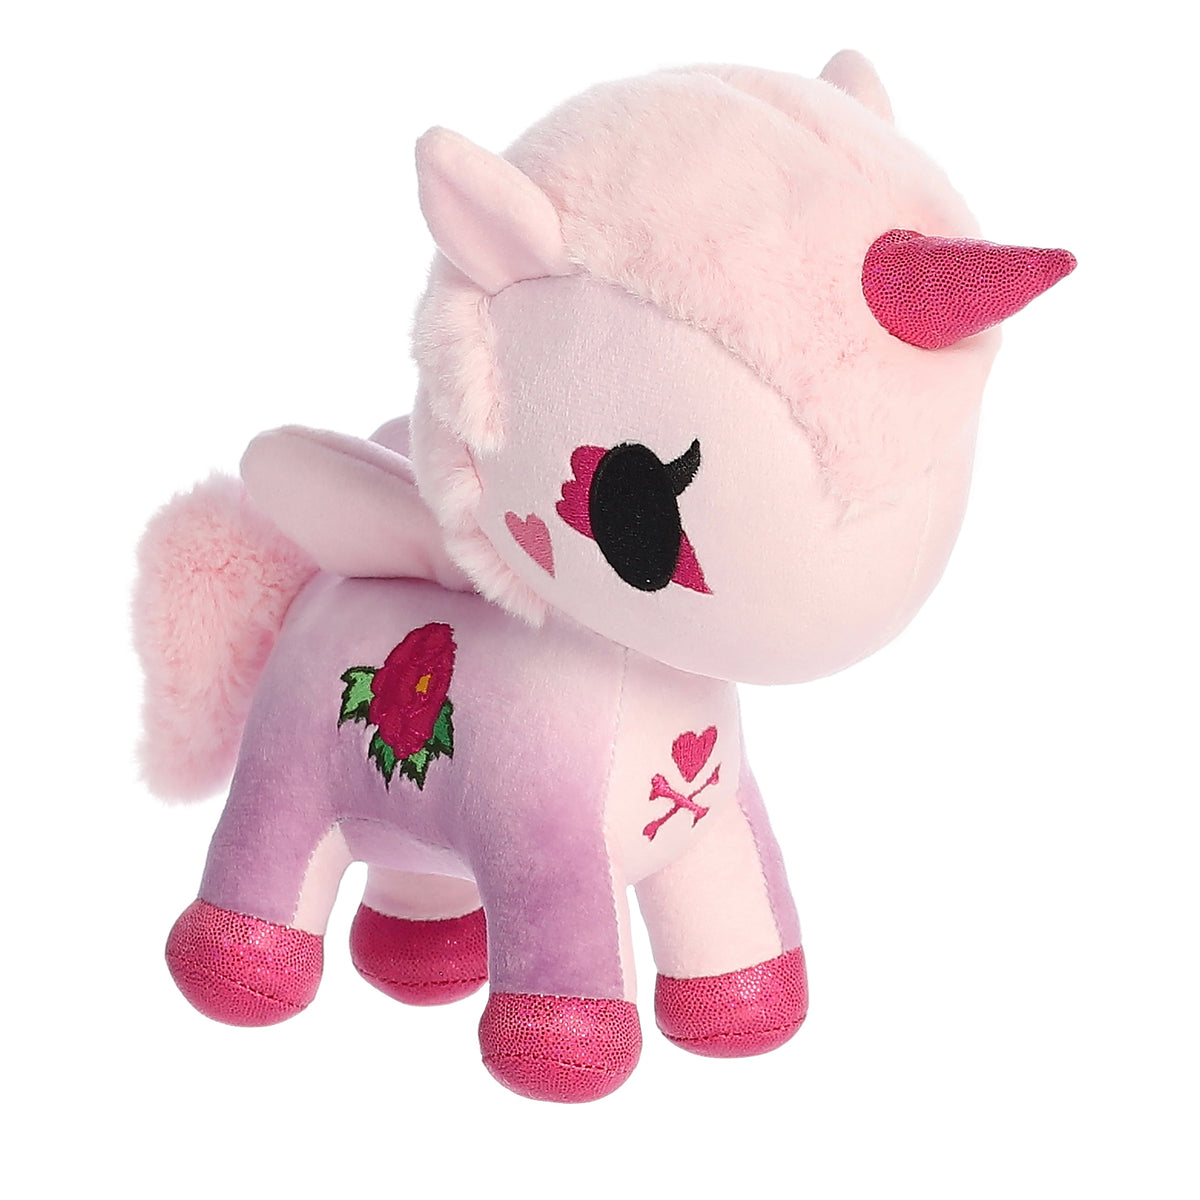 A unicorn with a pink body and hot-pink hooves and horn while sporting an embroidered peony on its side.